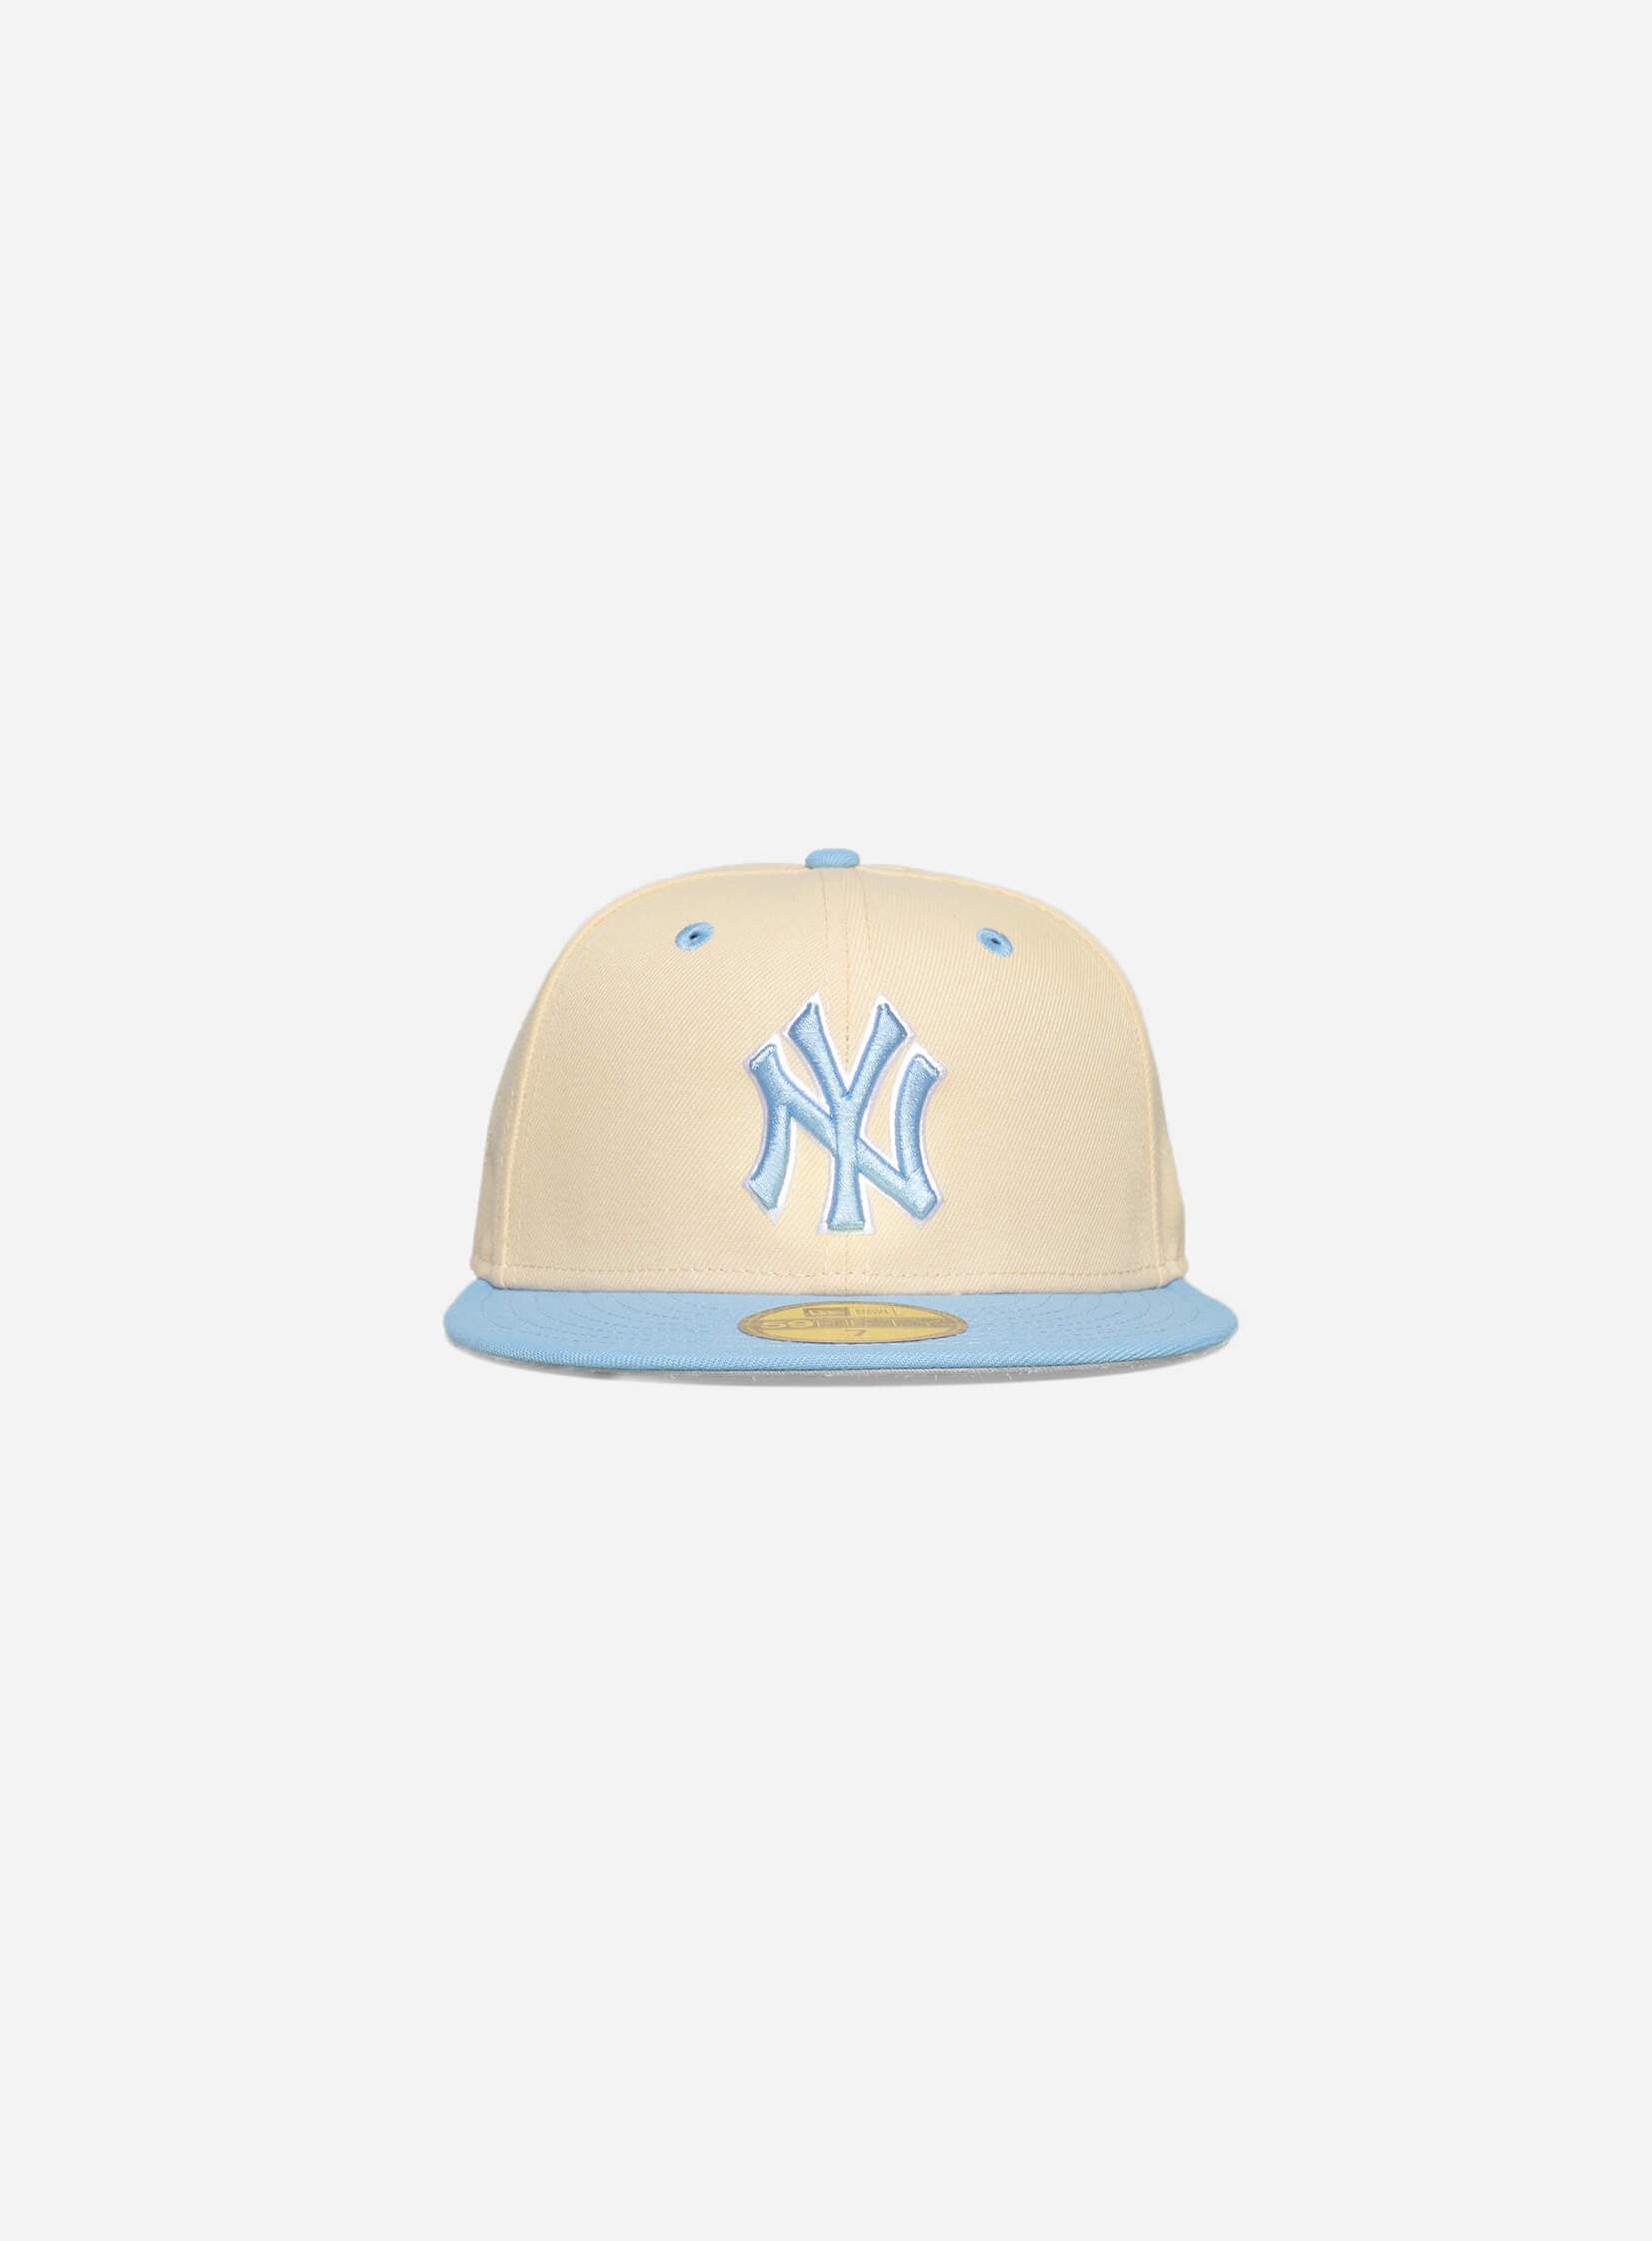 New York Yankees Iced Latte 59Fifty Fitted